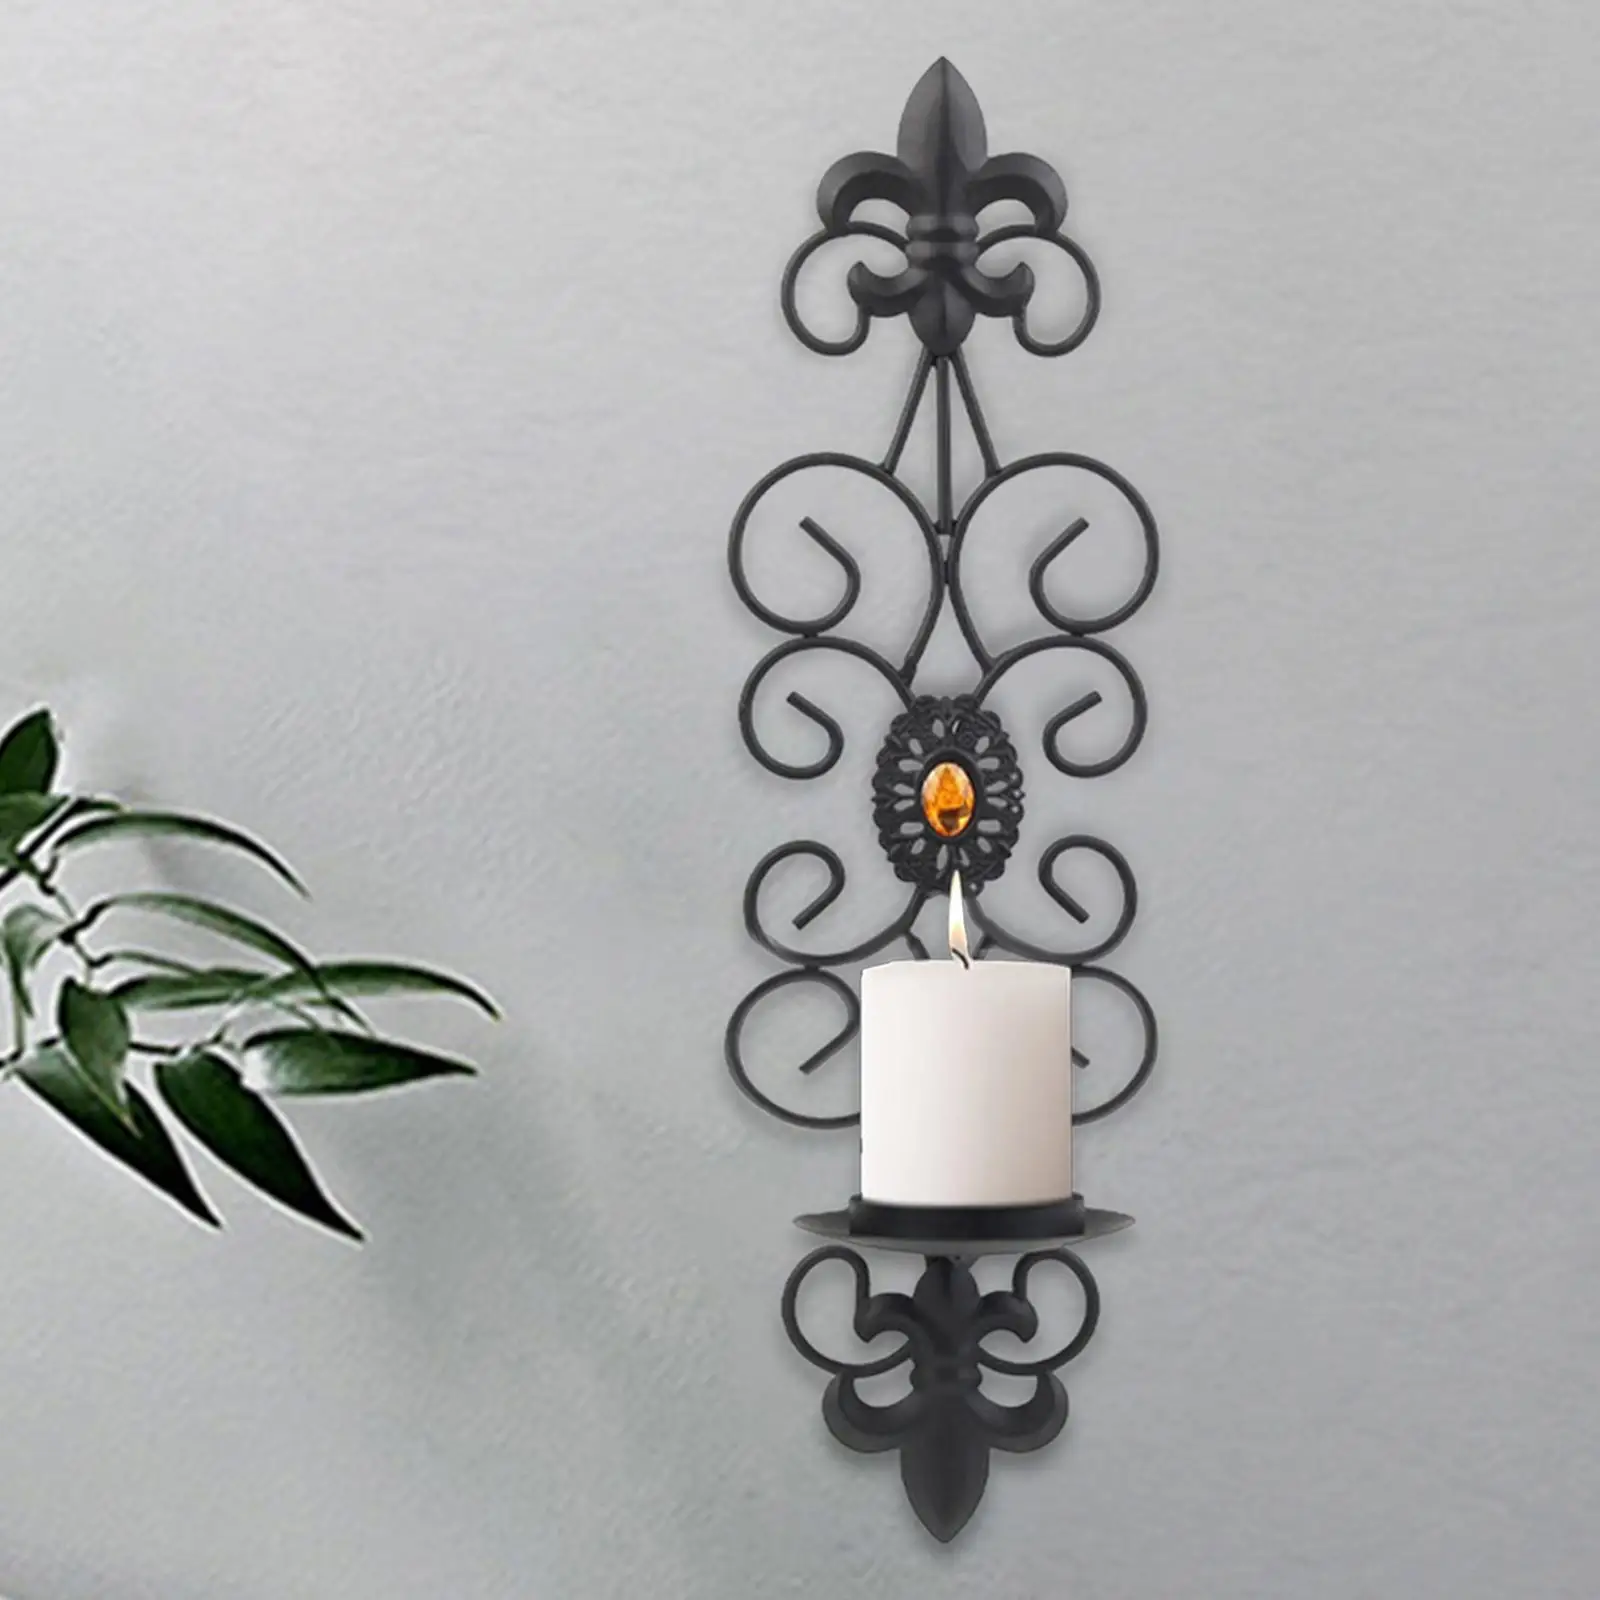 Tealight Candle Holders Tealight Holder Iron Metal Wall Art for Decoration